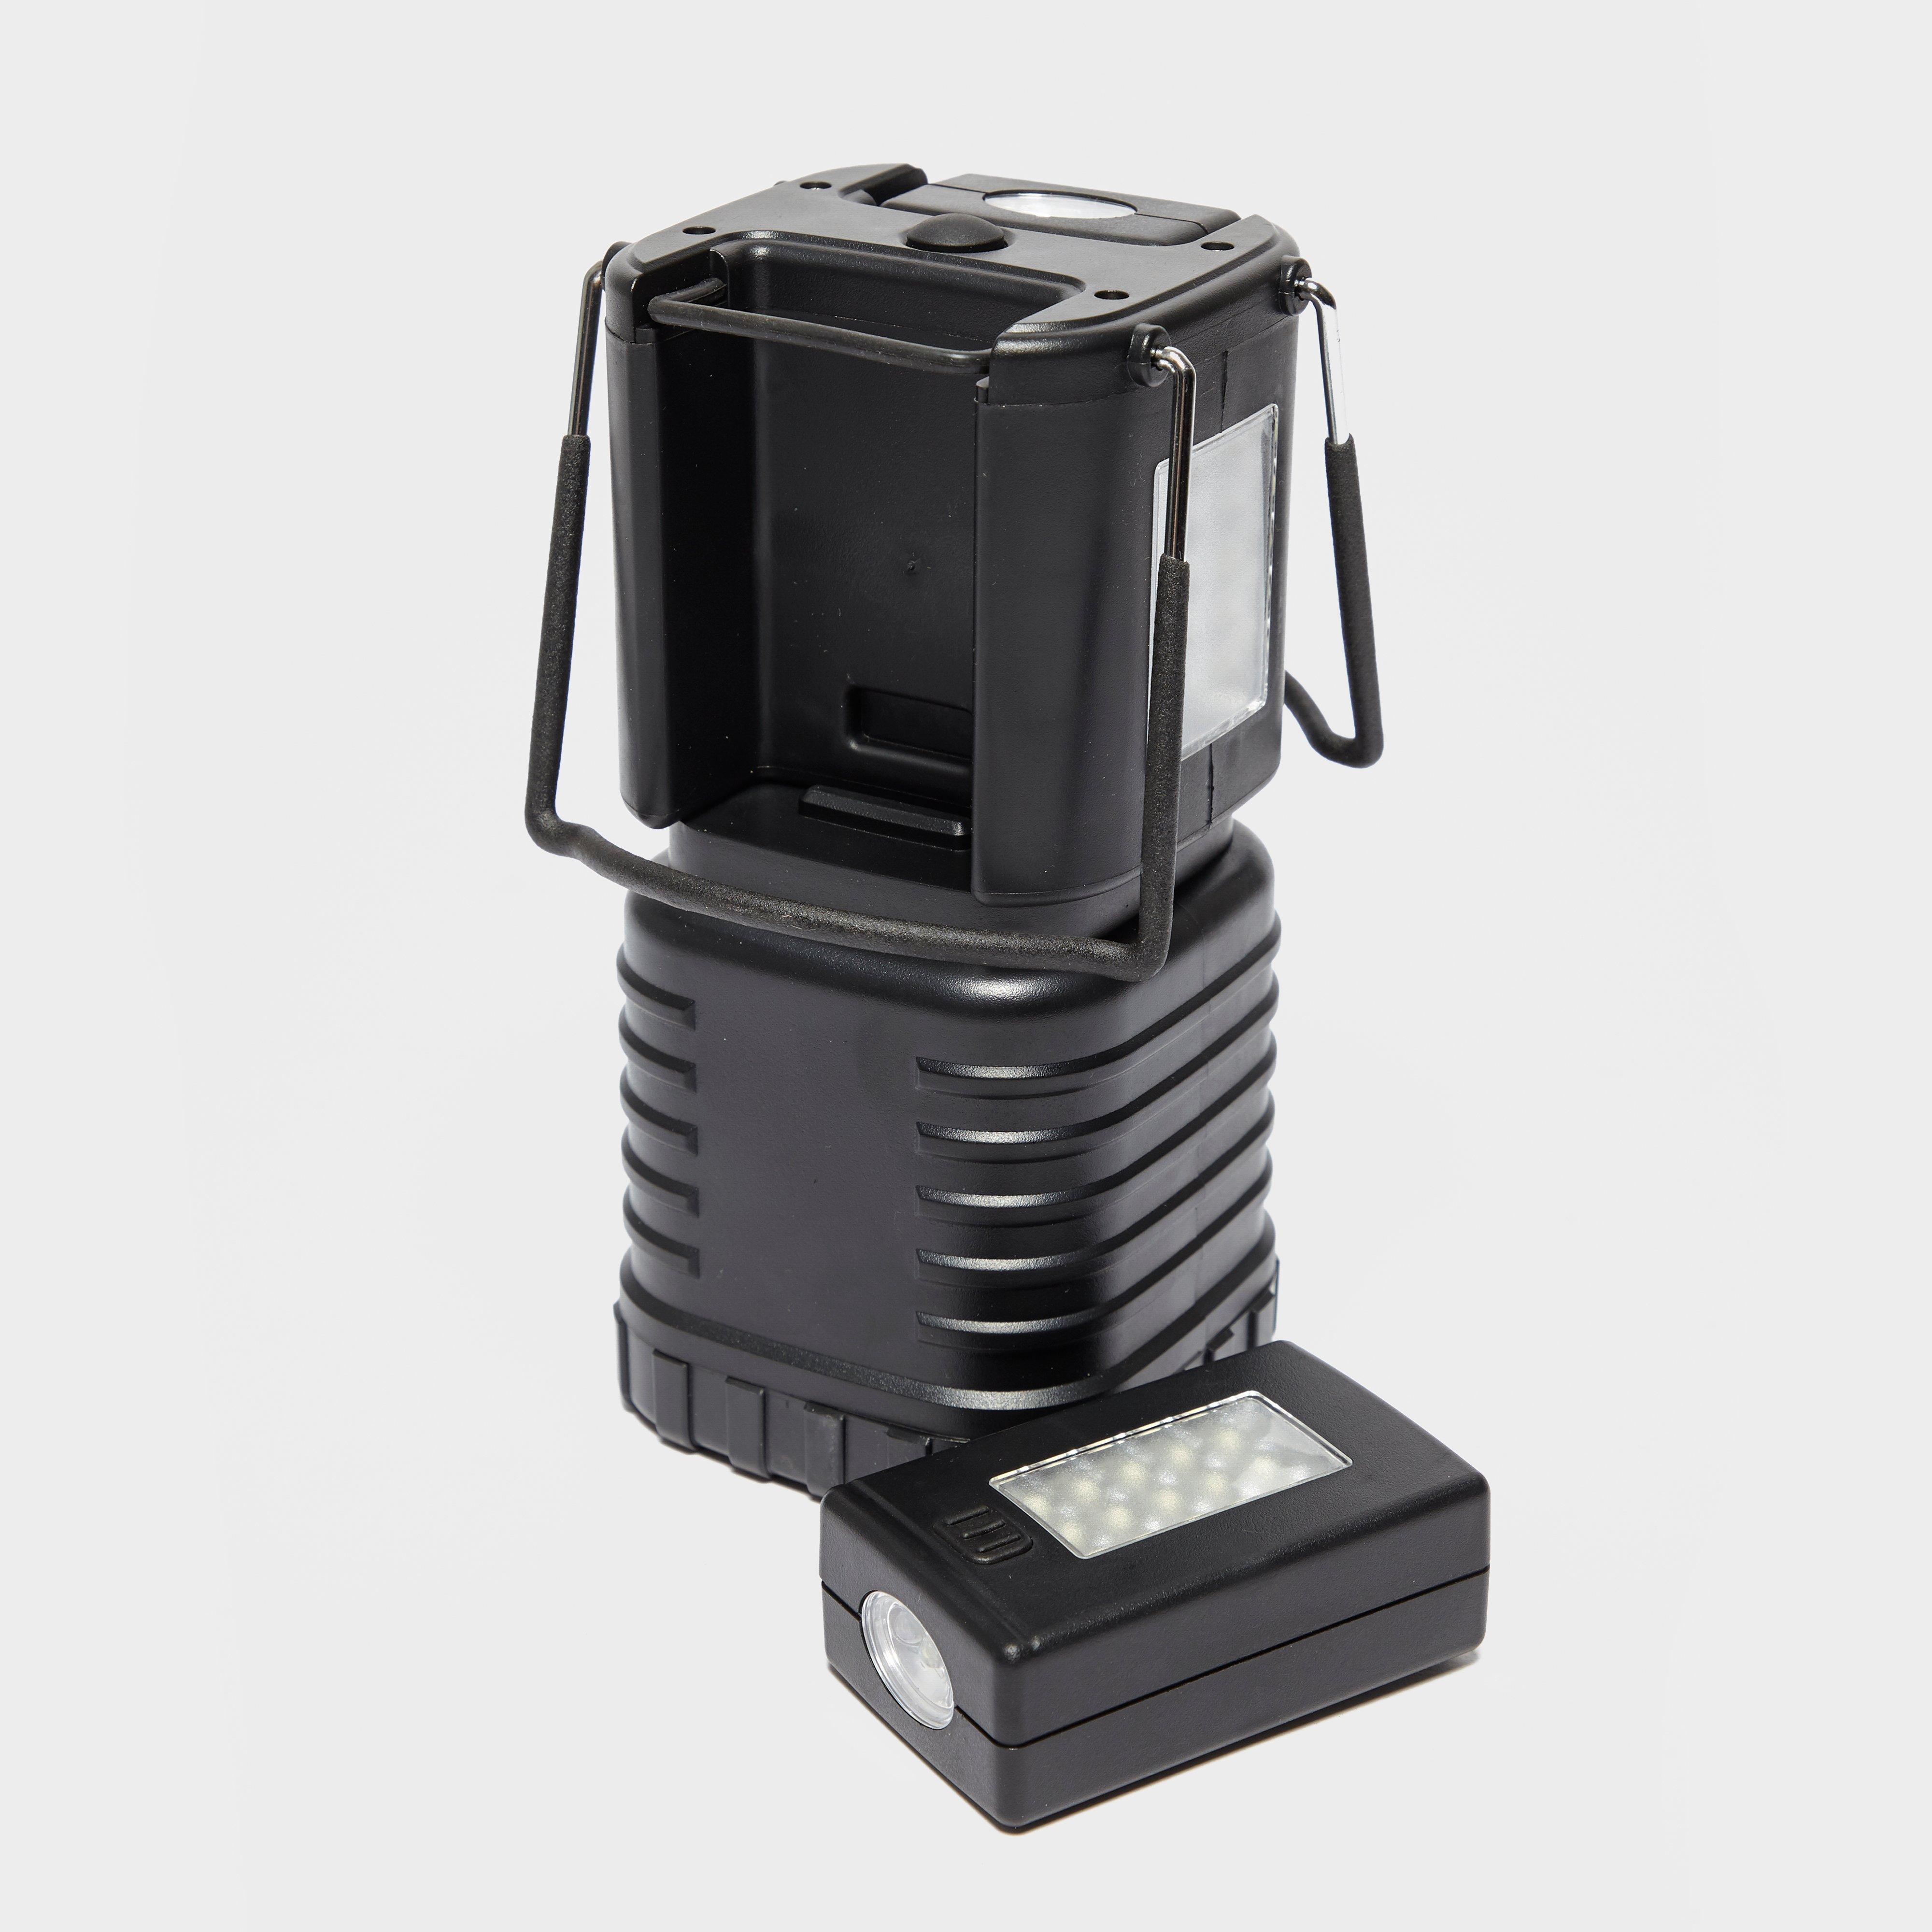 Eurohike 66 LED Lantern + 2 Torches Review